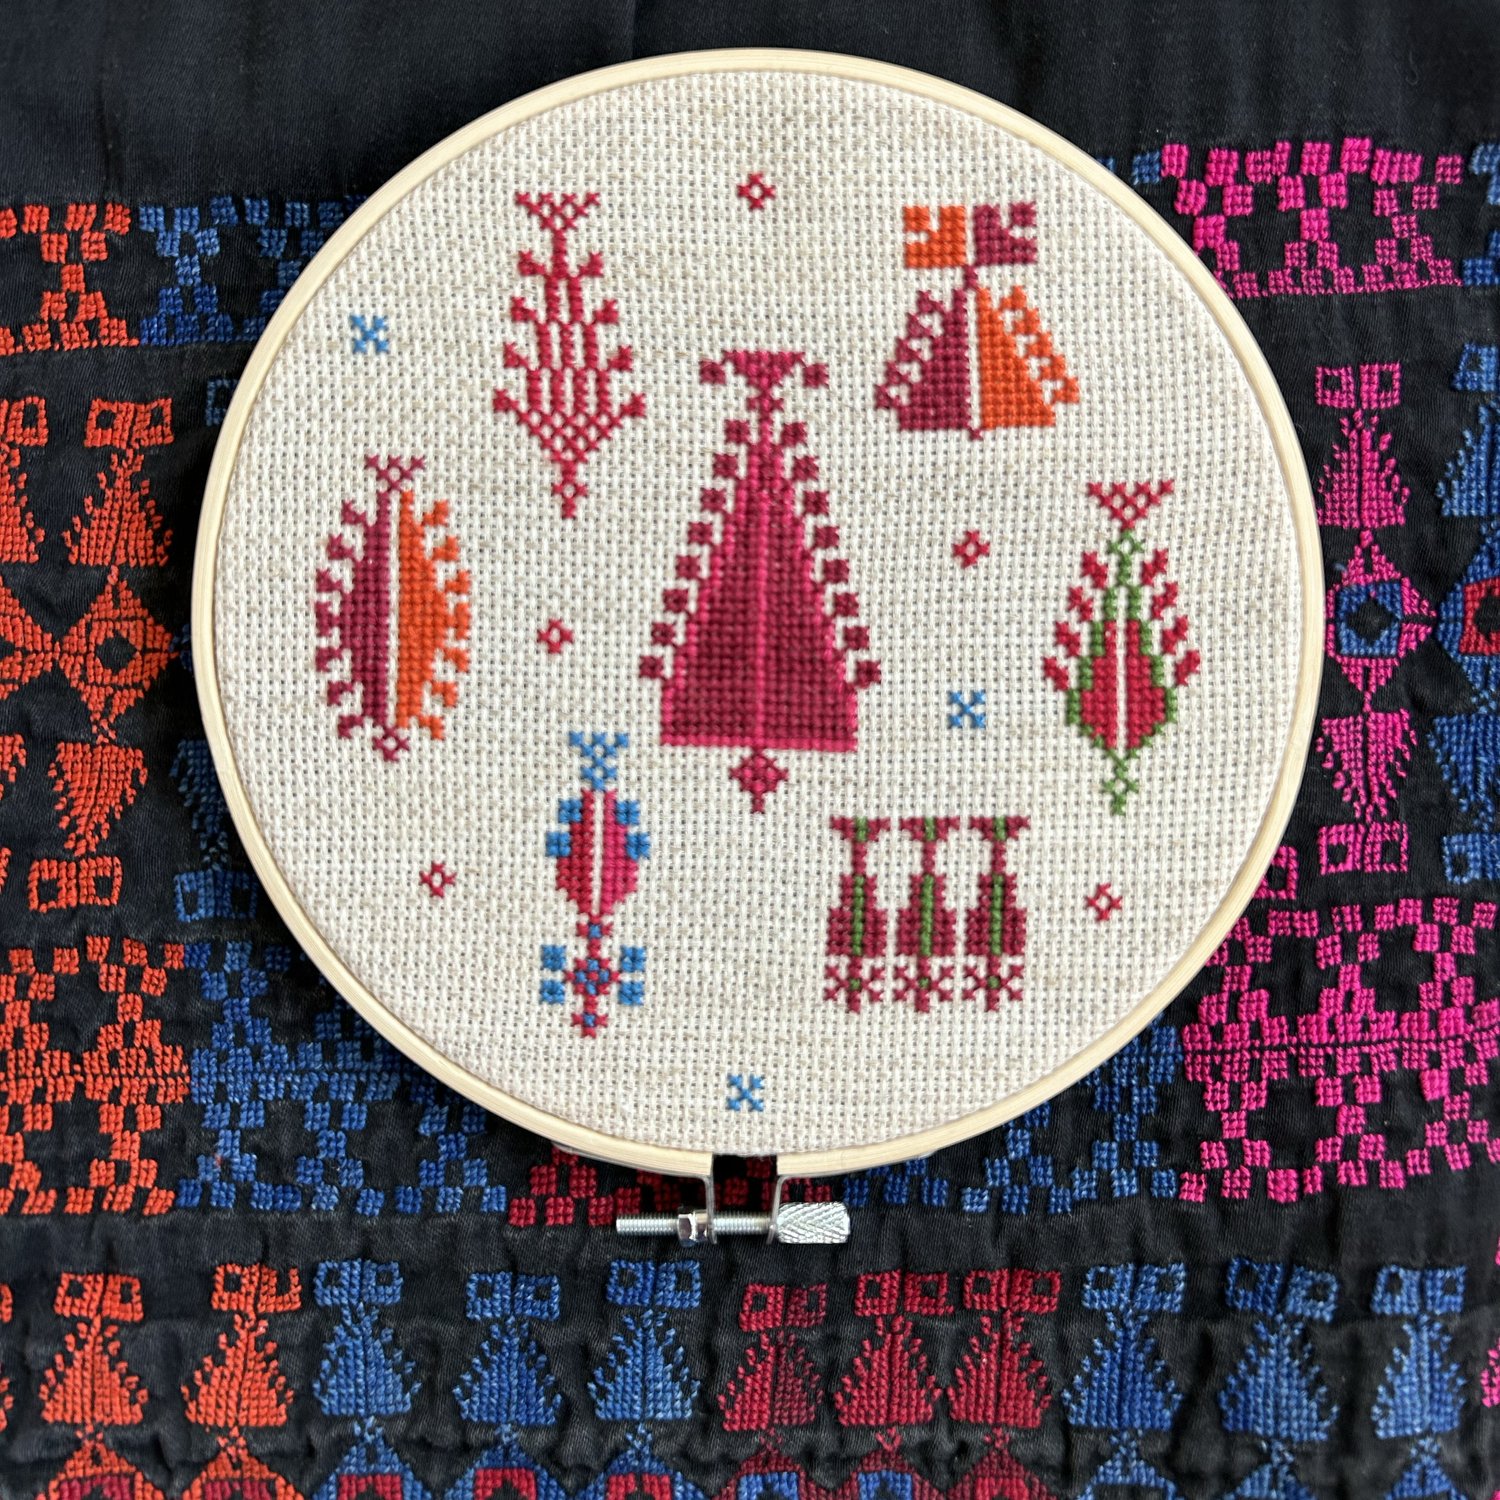 All Handmade Hand-Embroidered Palestinian Designs